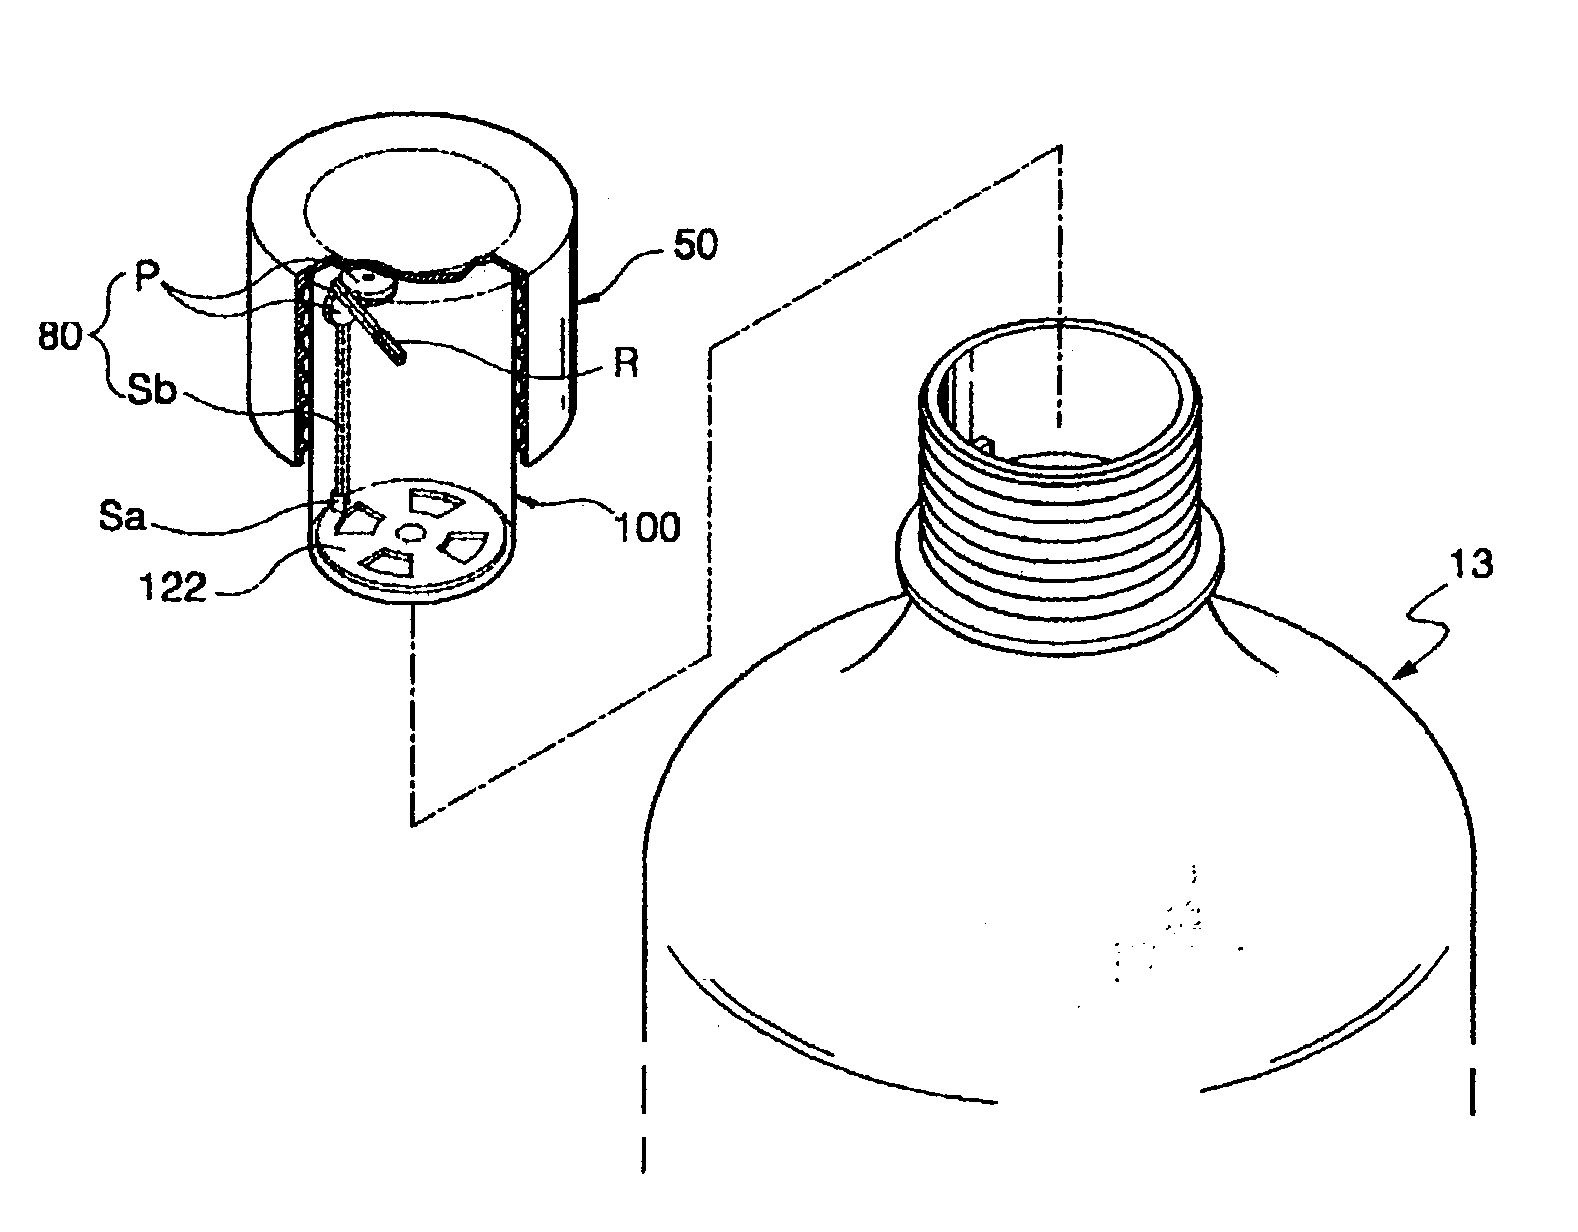 Cap device for mixing different kinds of substances separately kept therein within a container